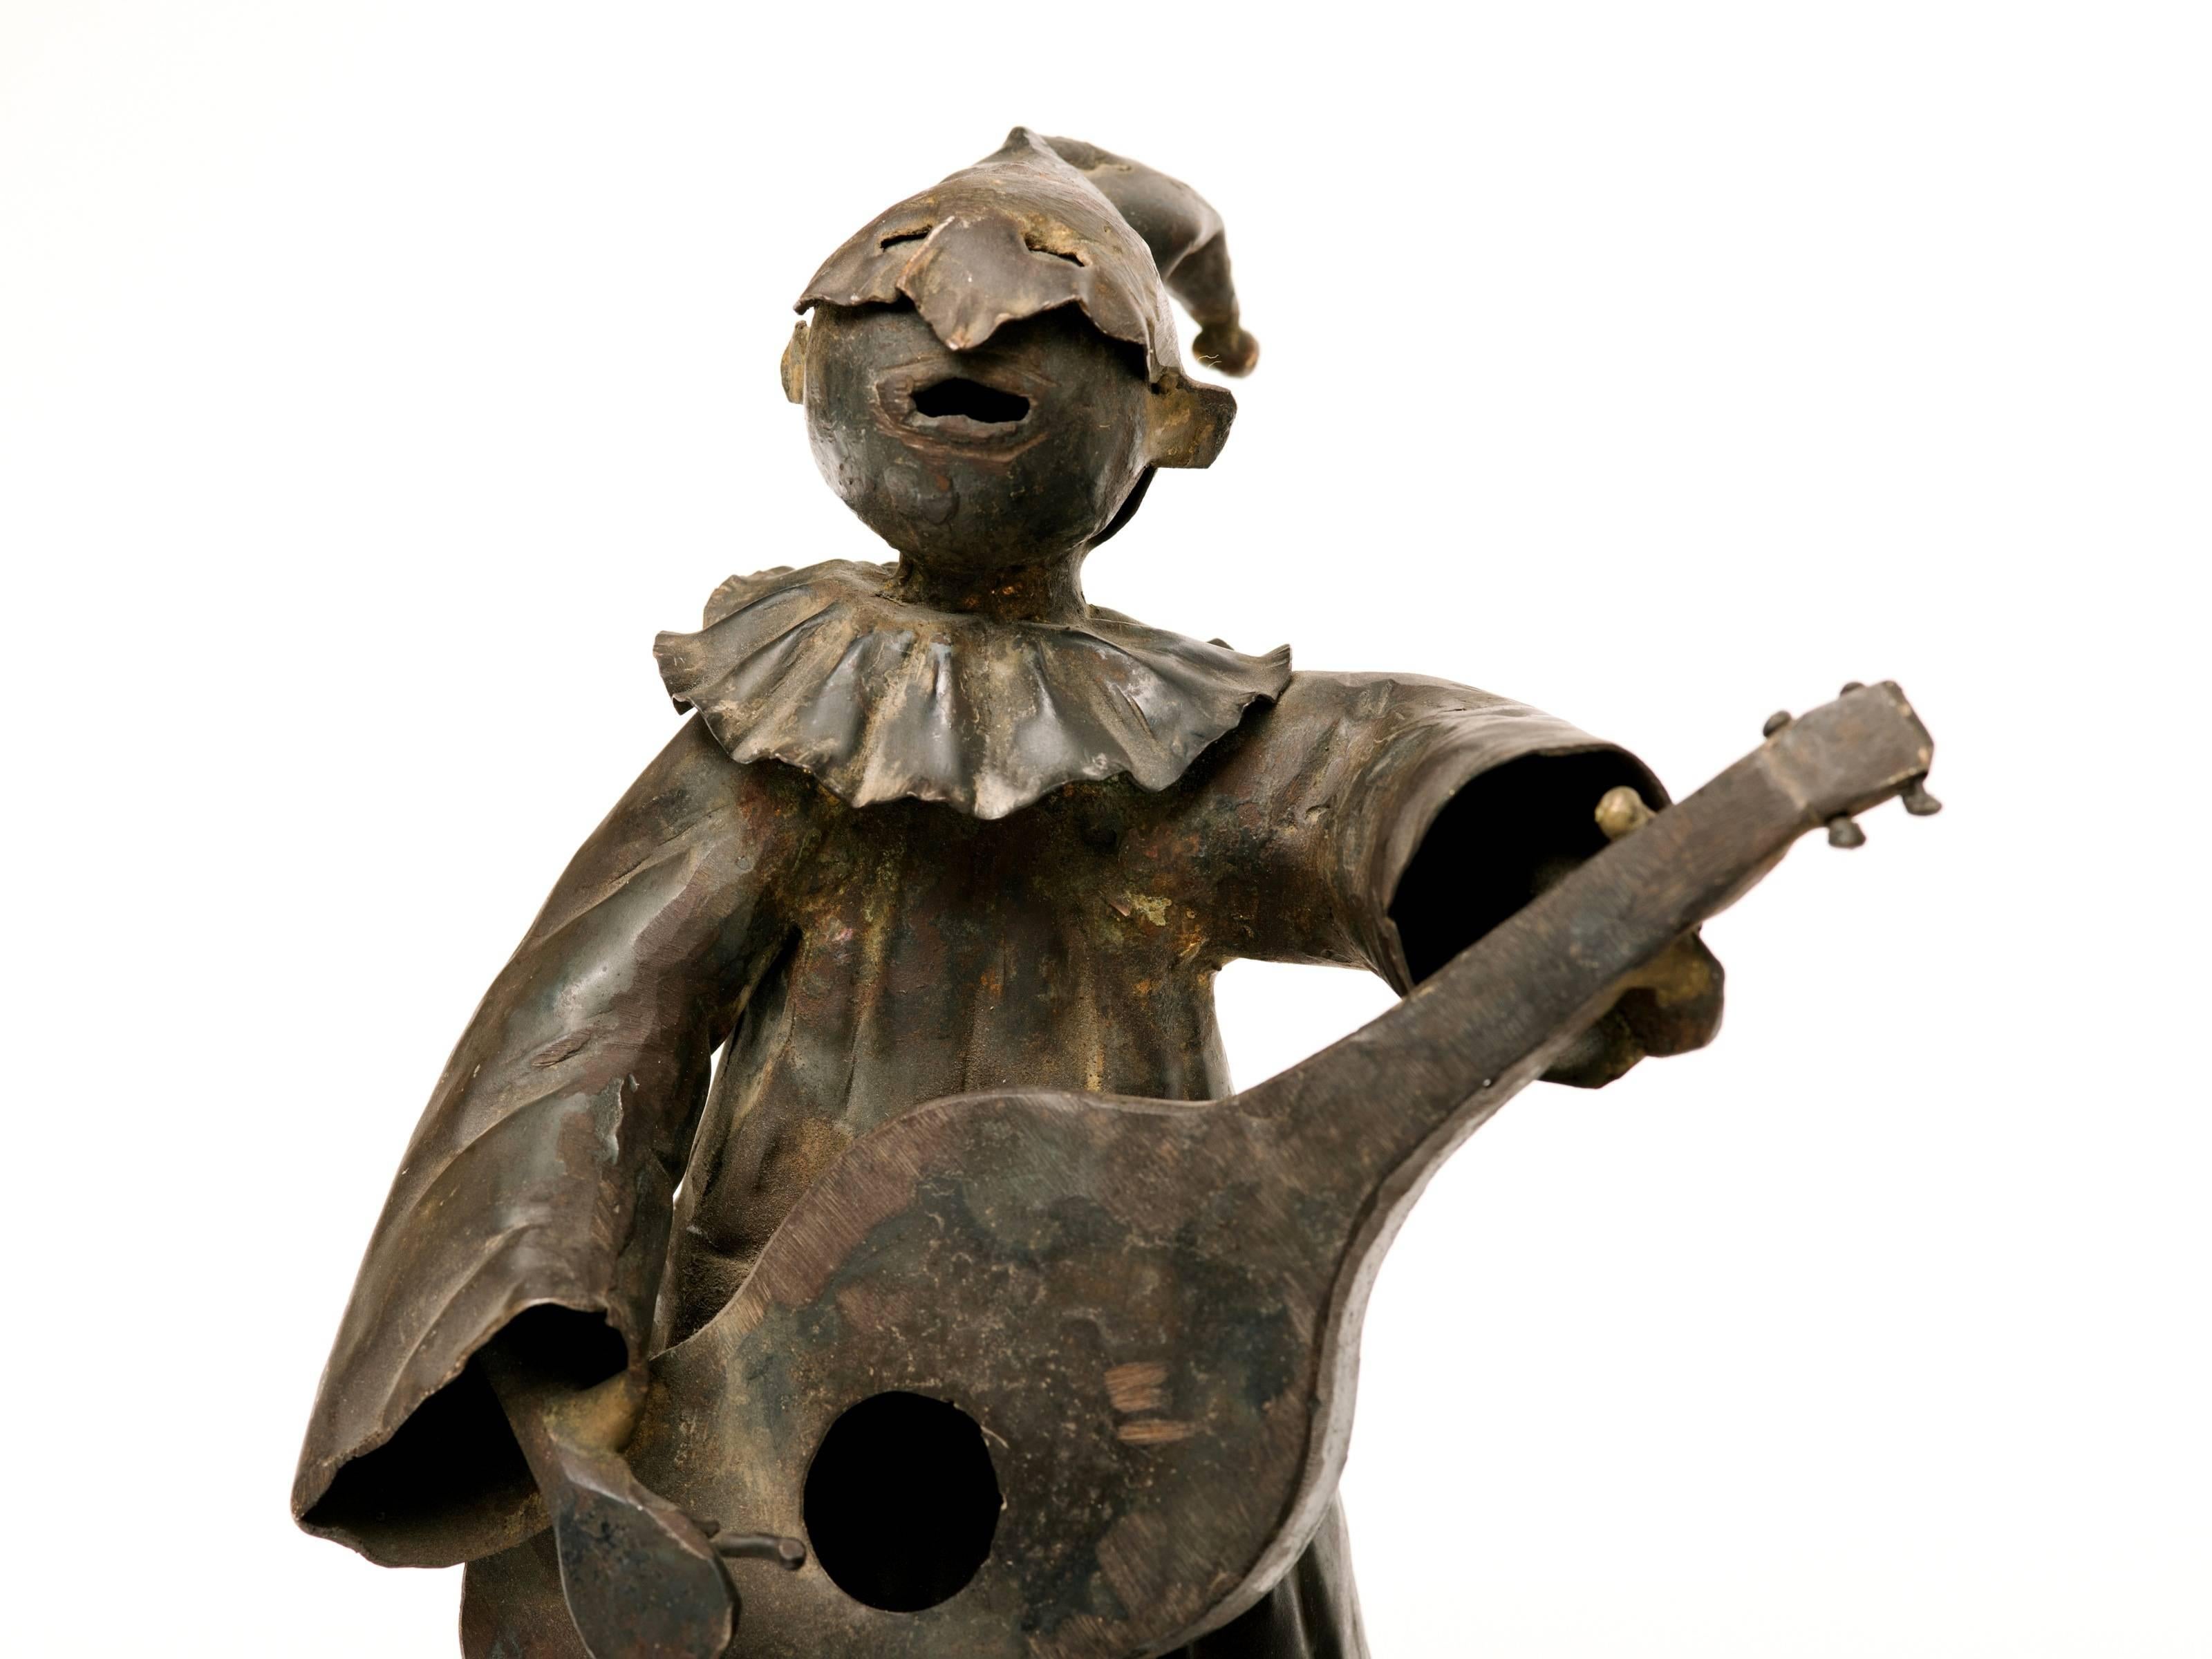 Rare, Fun and Whimsical is this pair of Commedia dell'arte metal sculptures from Italy circa 1950's. To the eye, these are quite unique and commanding in presence. One is a masked guitar player while the other is a performer.  
Commedia a form of